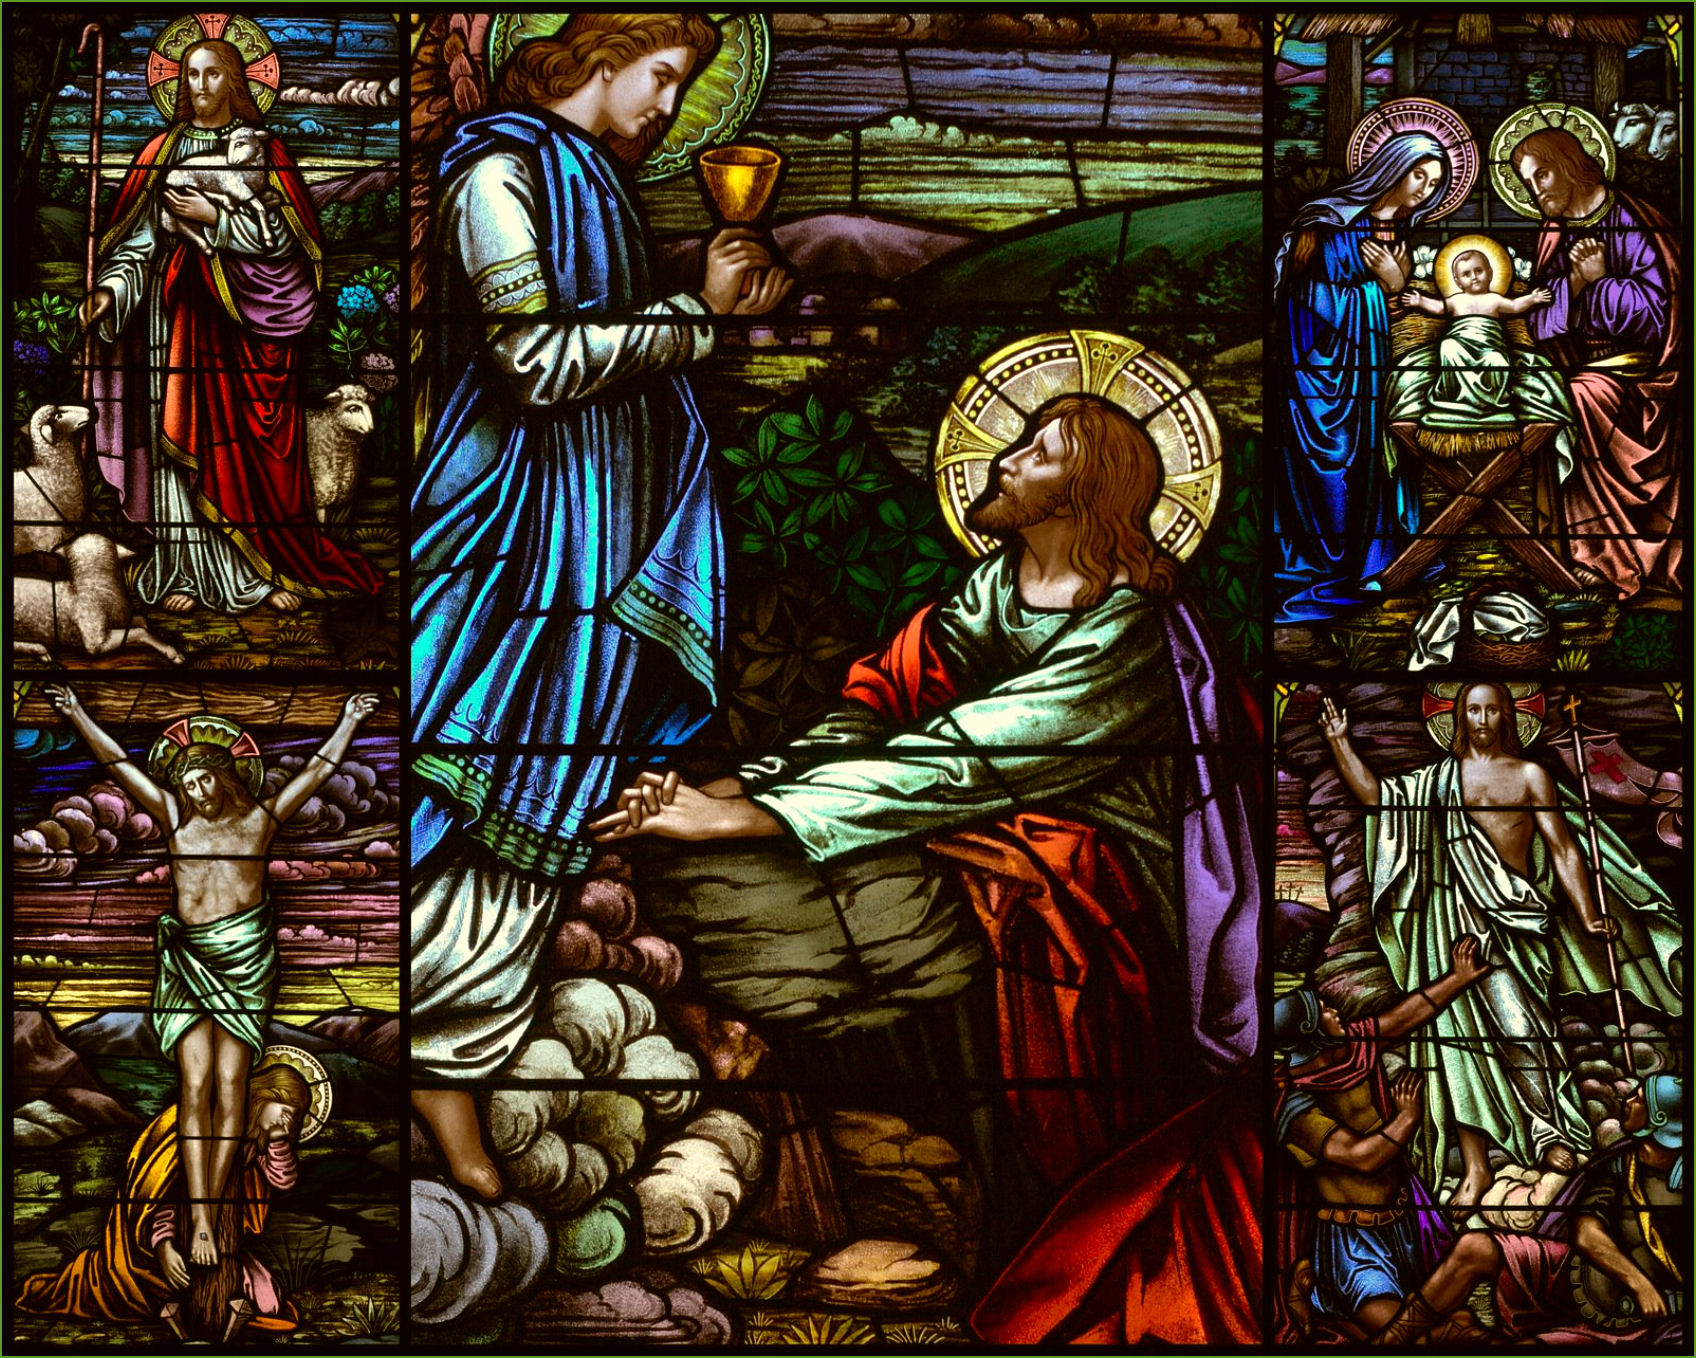 Stained Glass Window Of The Agony In Thegarden With Scenes From